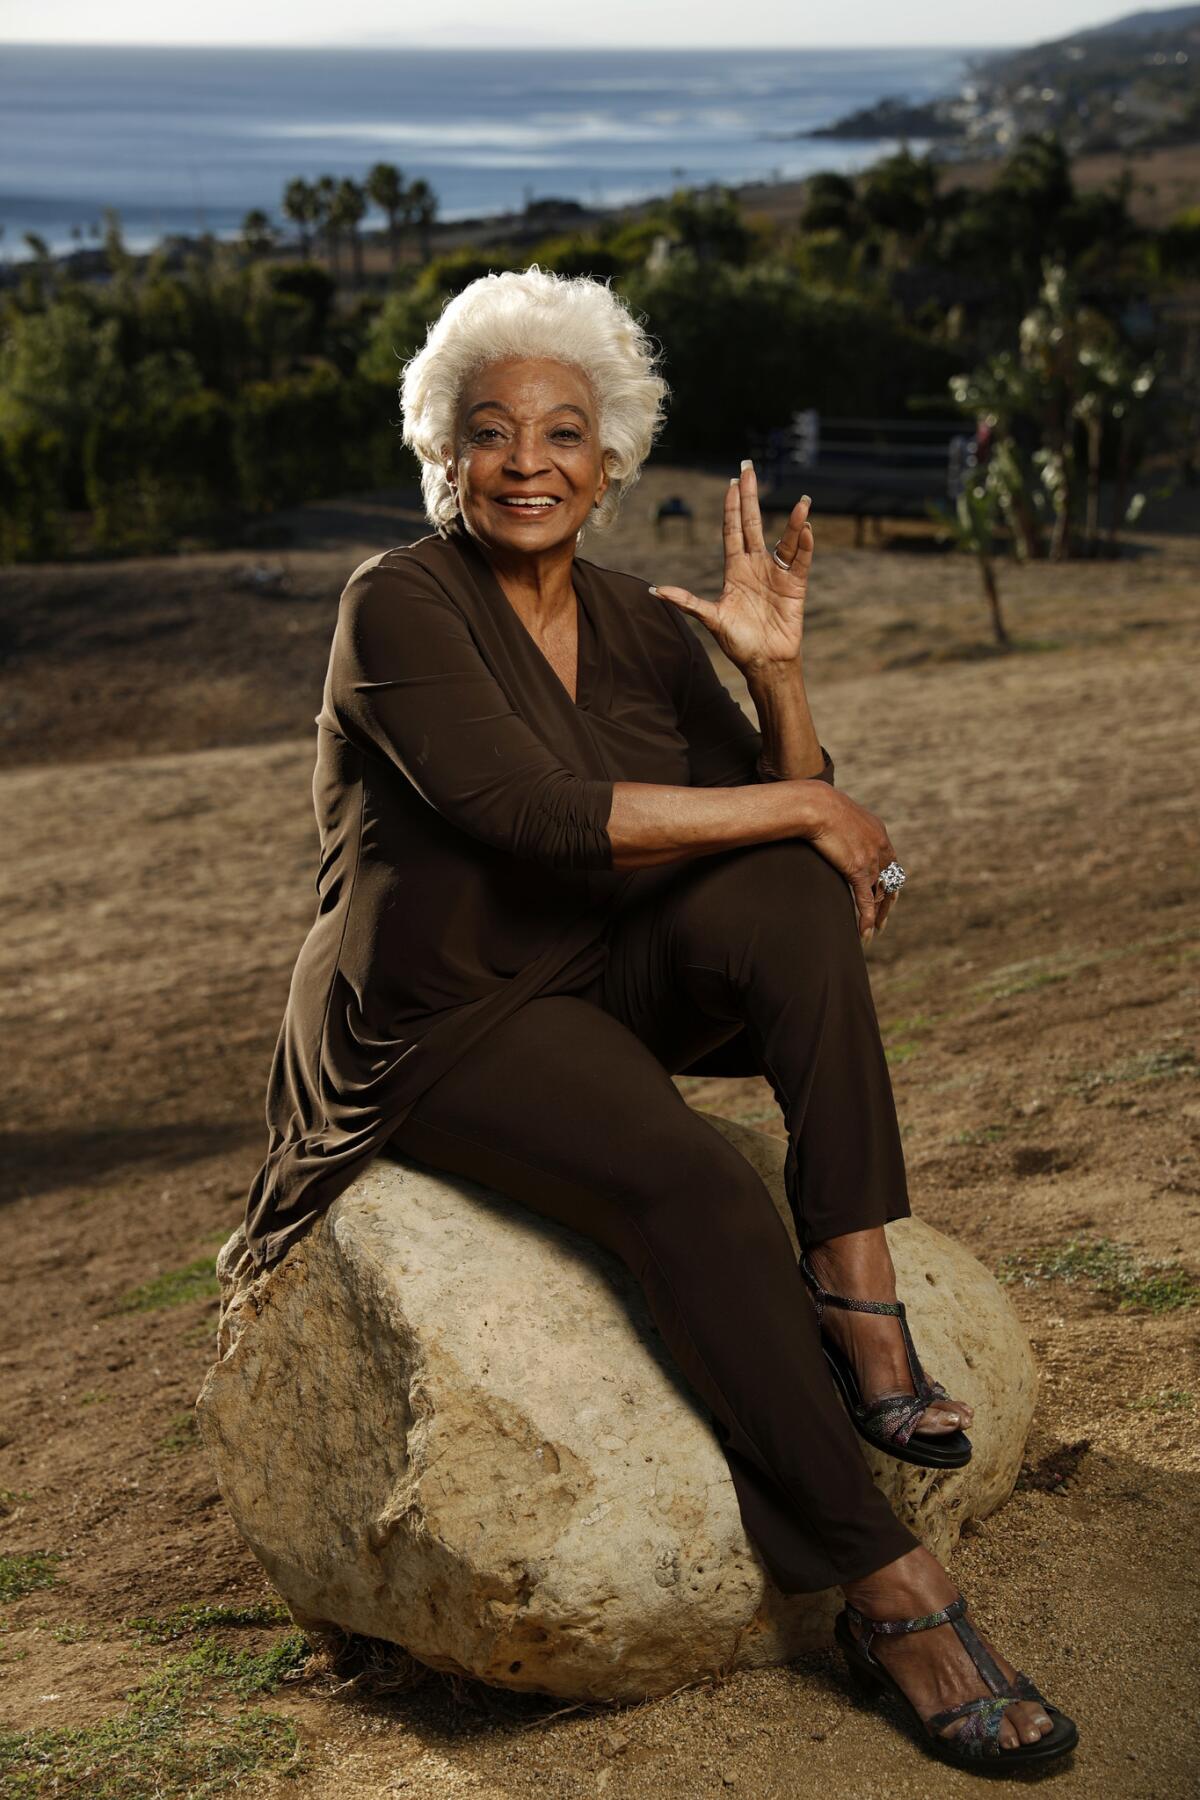 A woman with white hair sits on a rock and flashes the Vulcan salute.